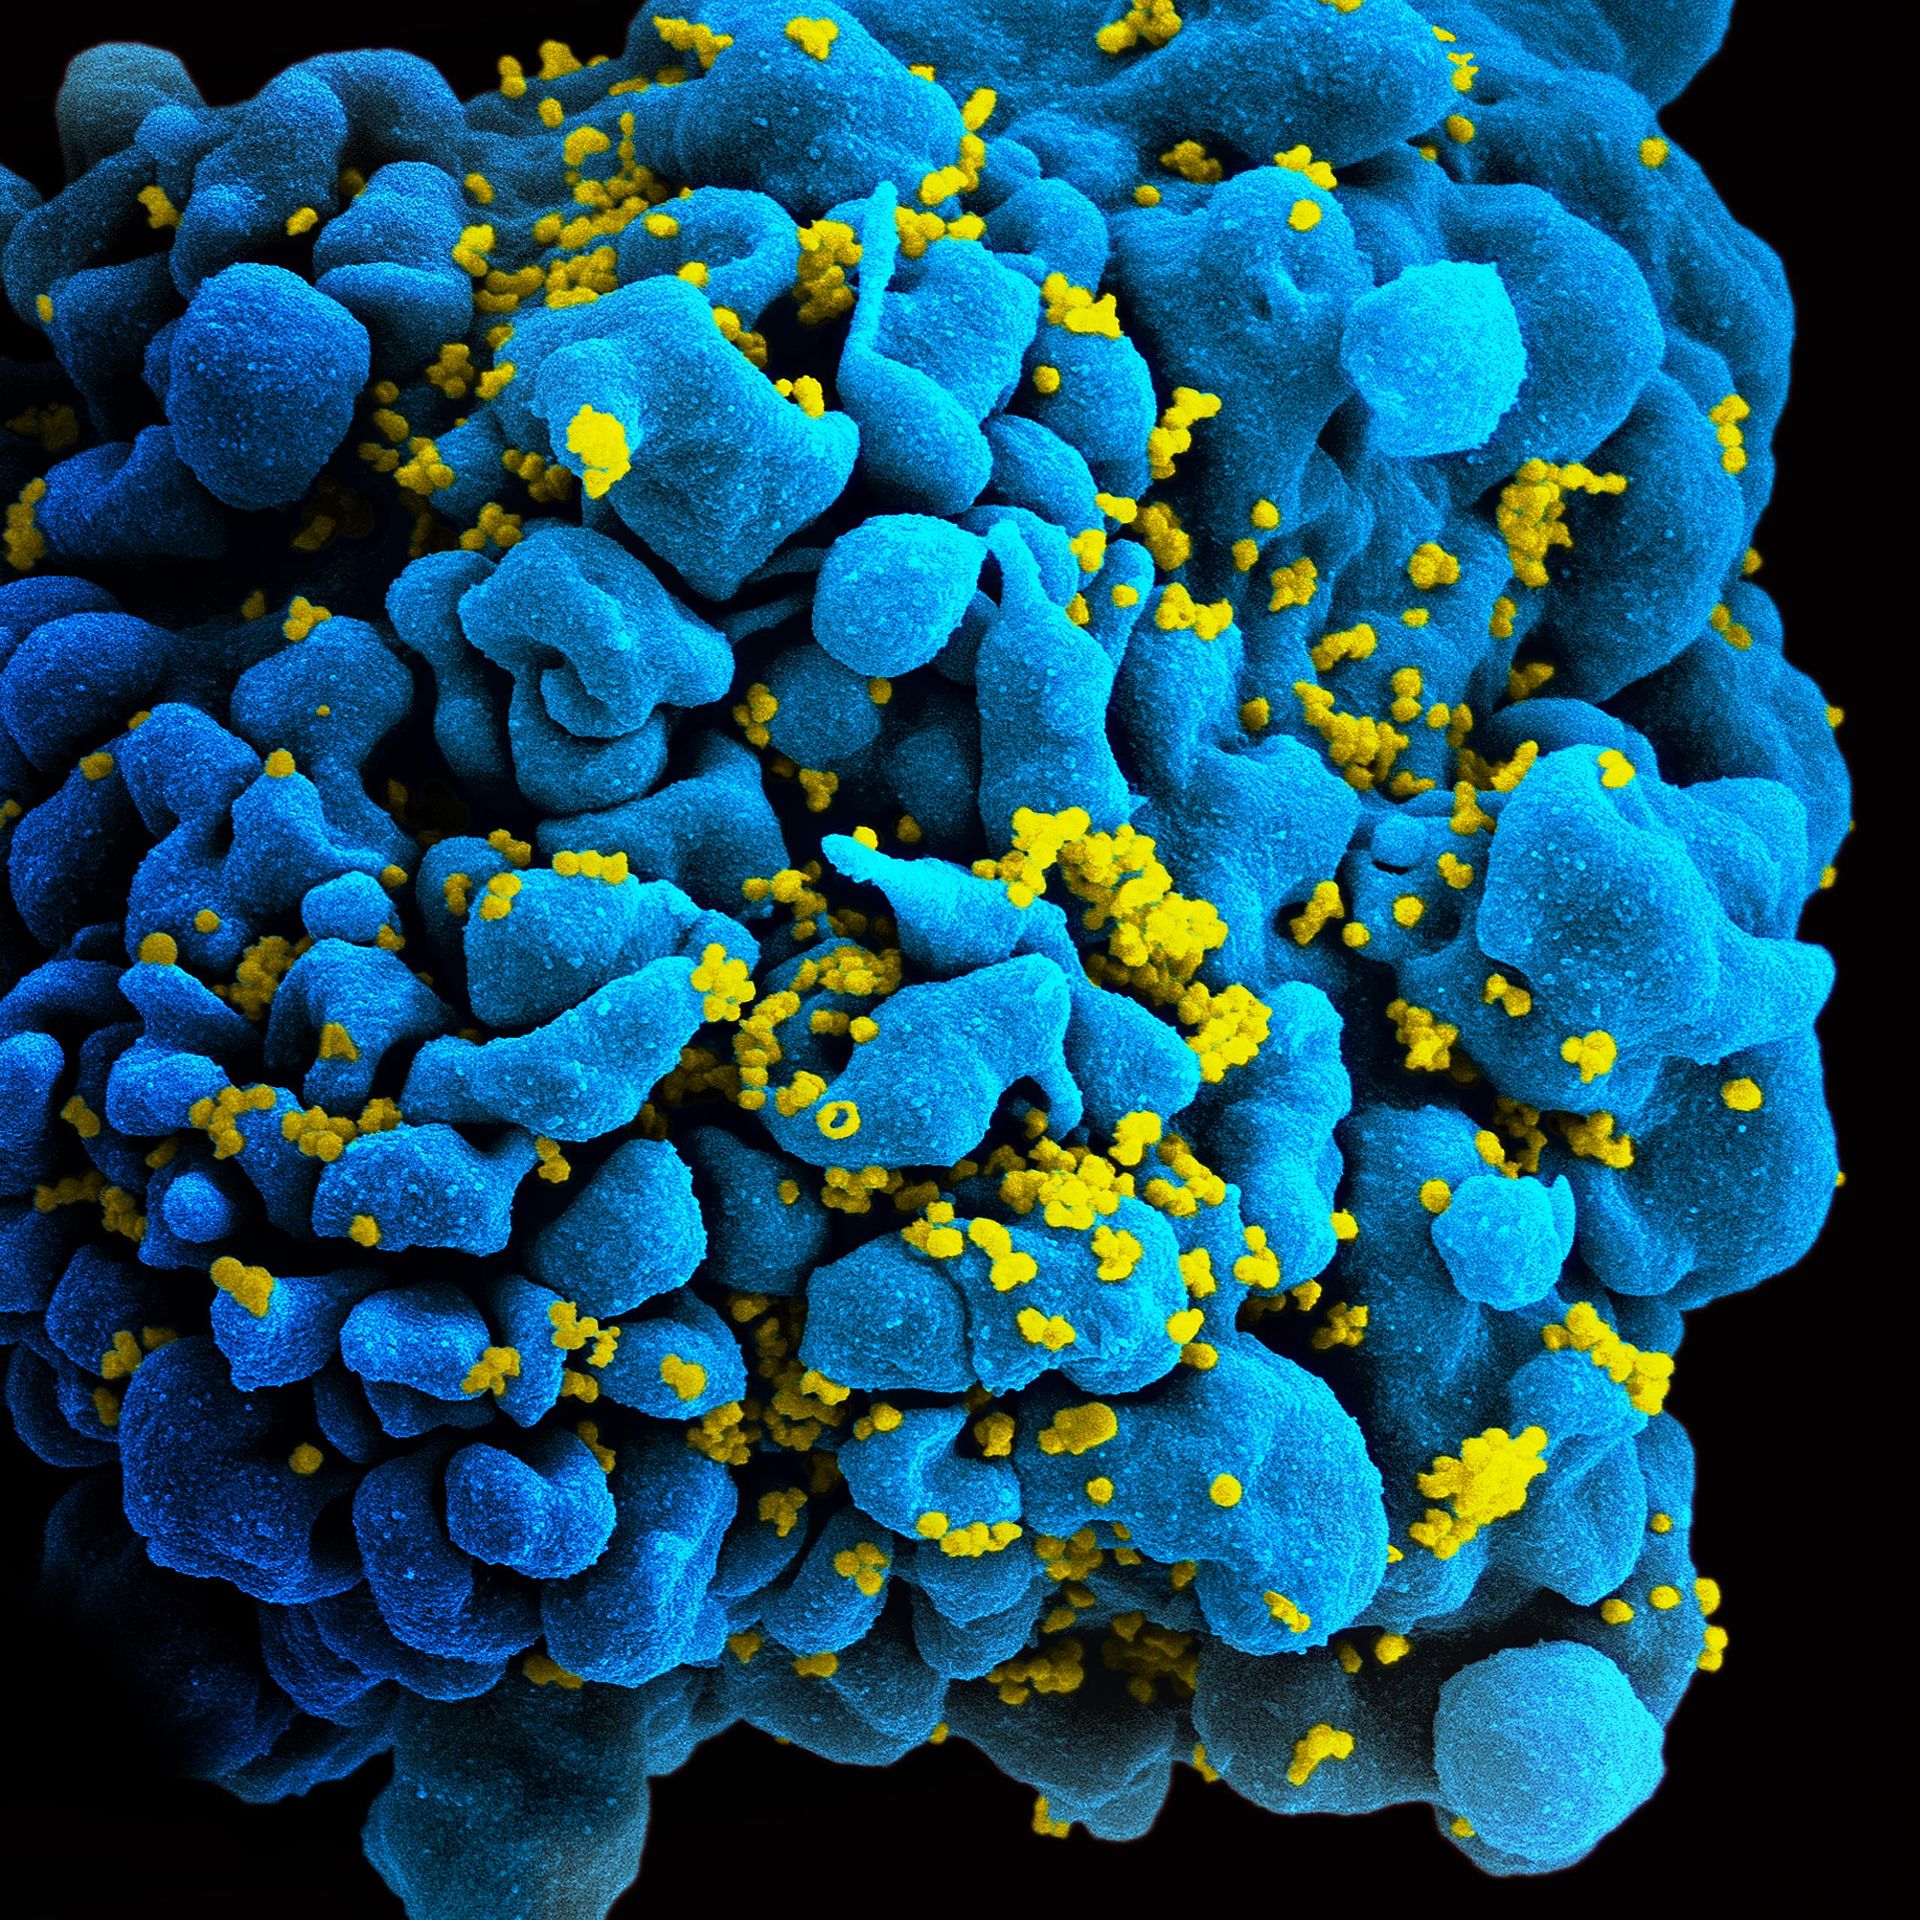 Drug-Resistant HIV on the Rise, WHO Warns Image